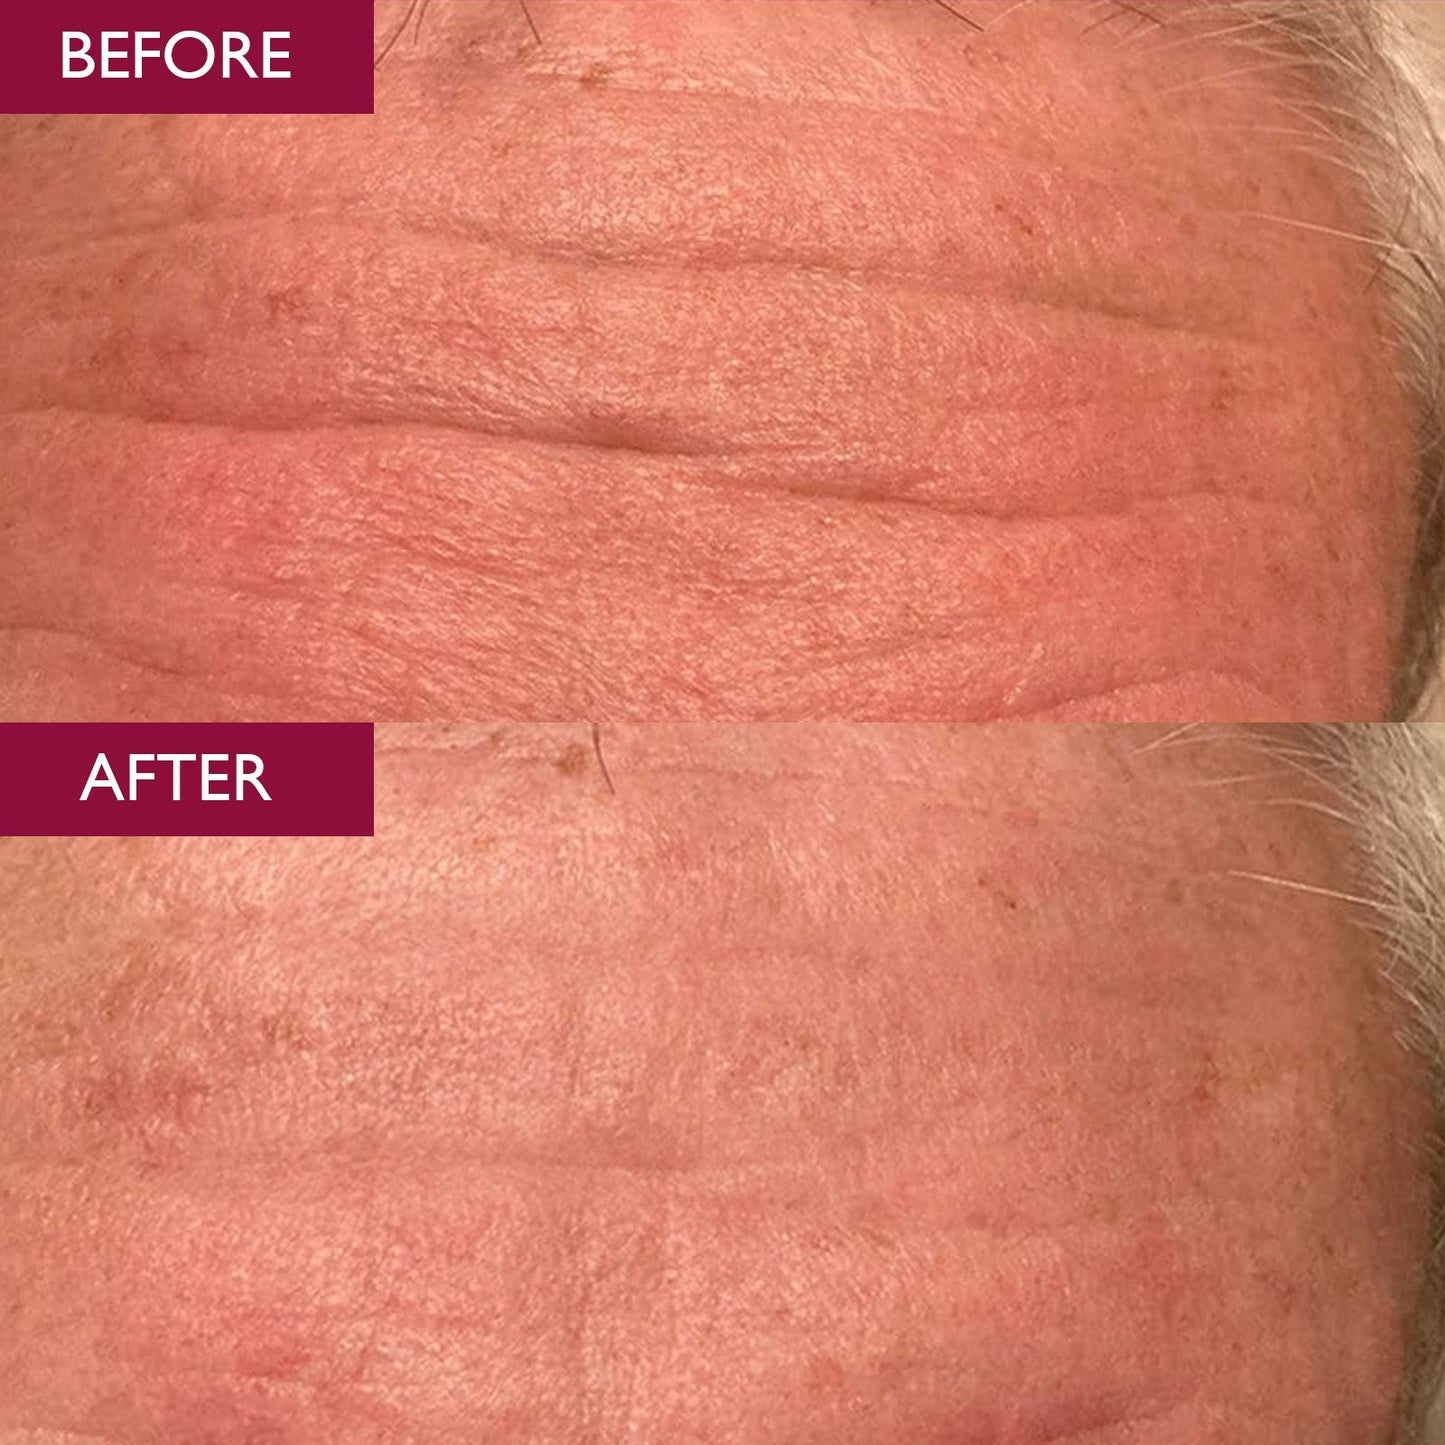 A before and after image of a man's wrinkles - results shown from using Skinicians facial serum for ageing